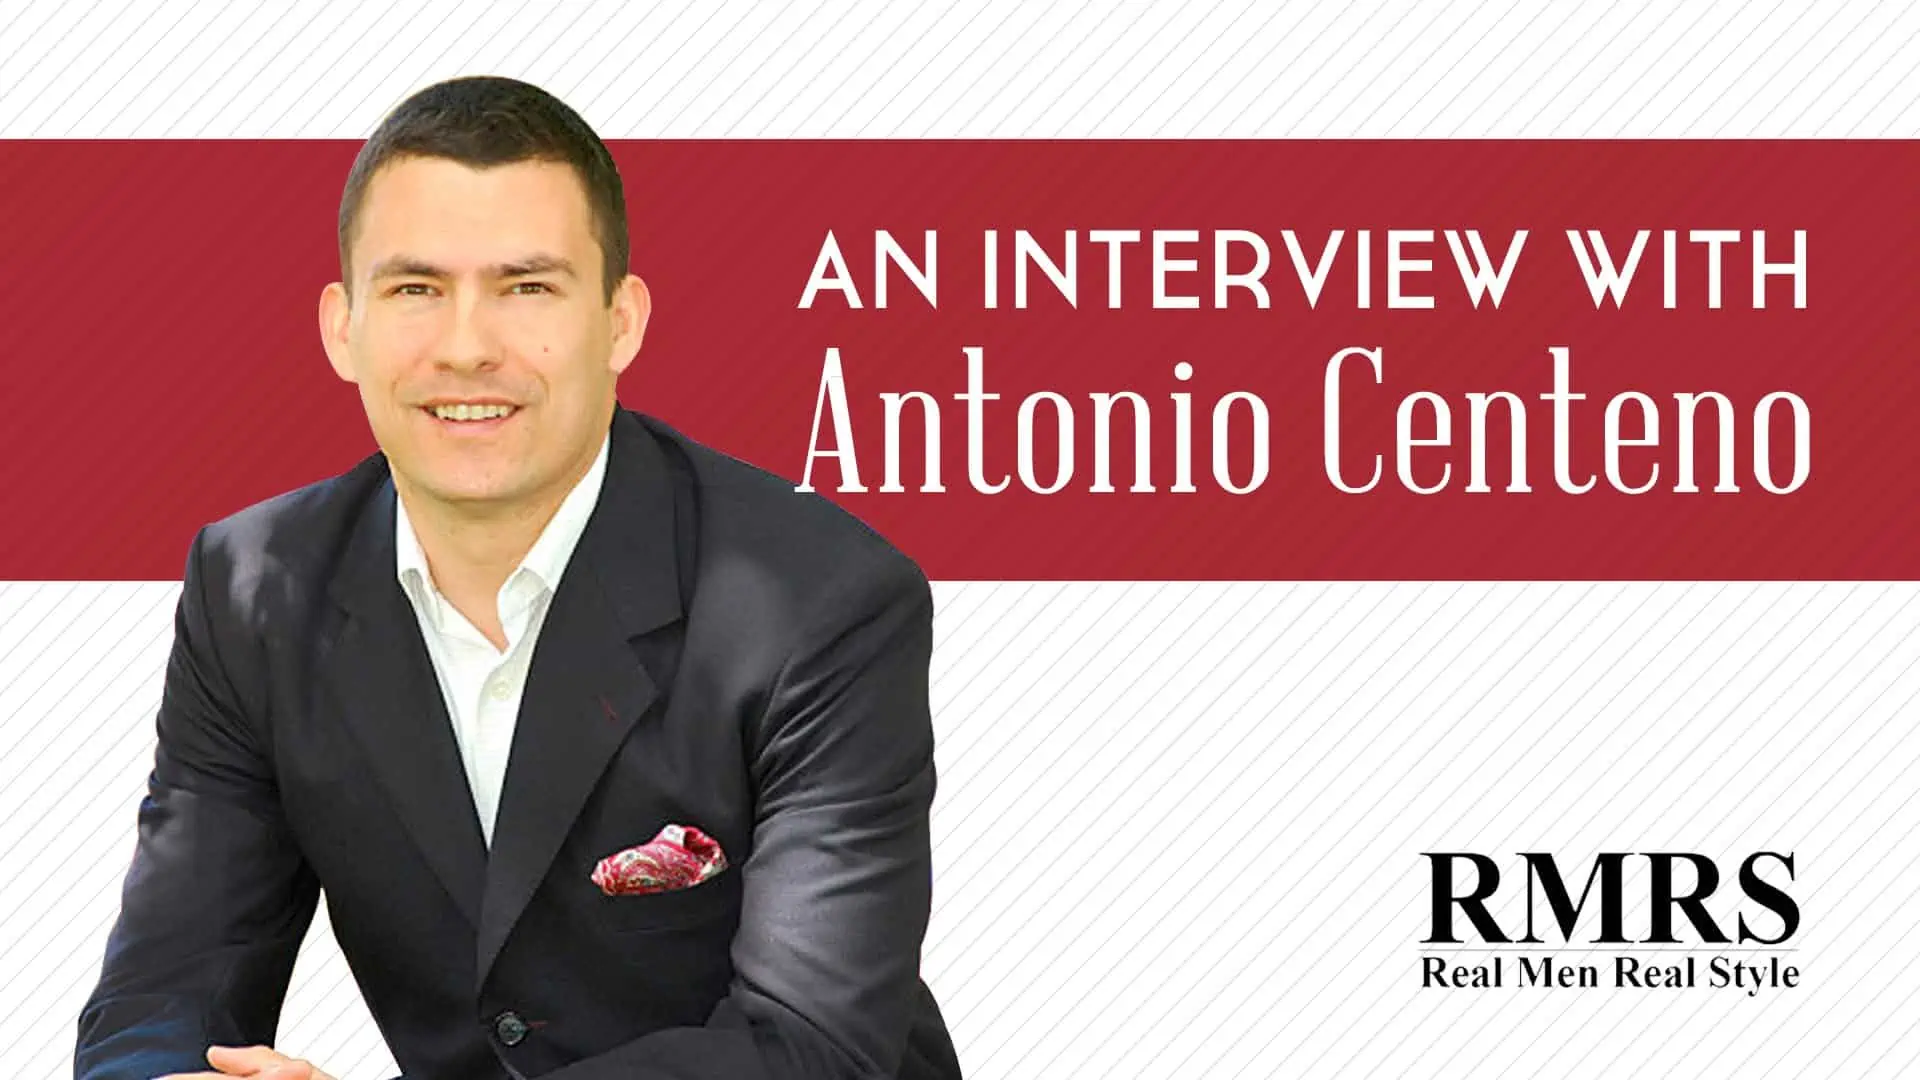 Antonio Centeno Interview from Real Men Real Style